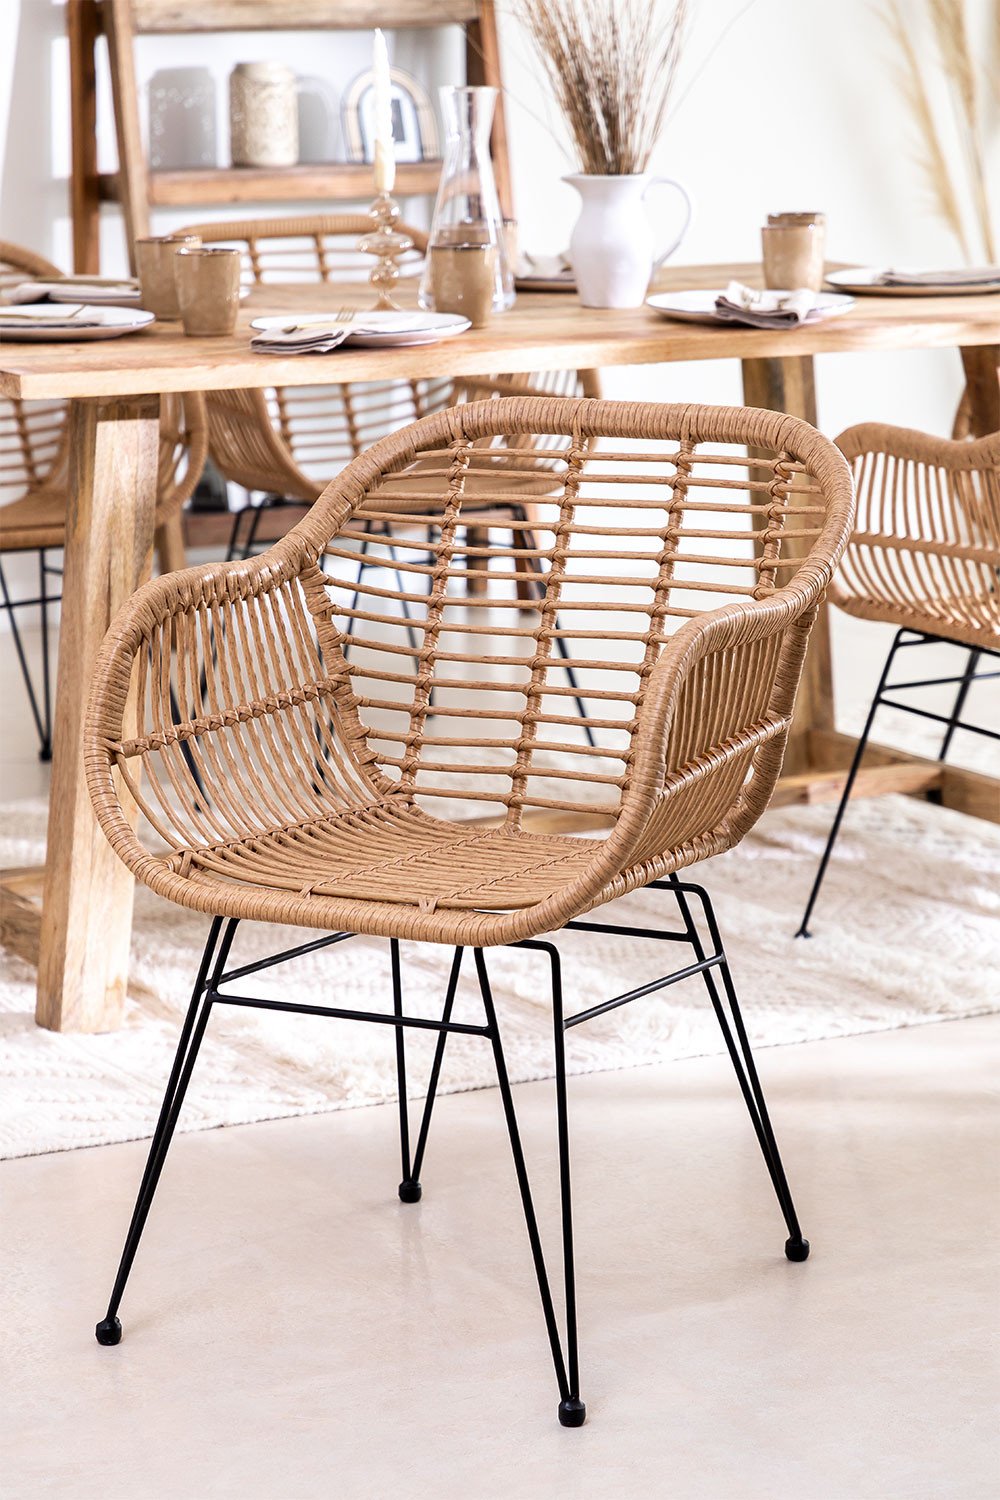 Synthetic Rattan Dining Chair Zole Sklum, Bamboo Dining Chairs Australia